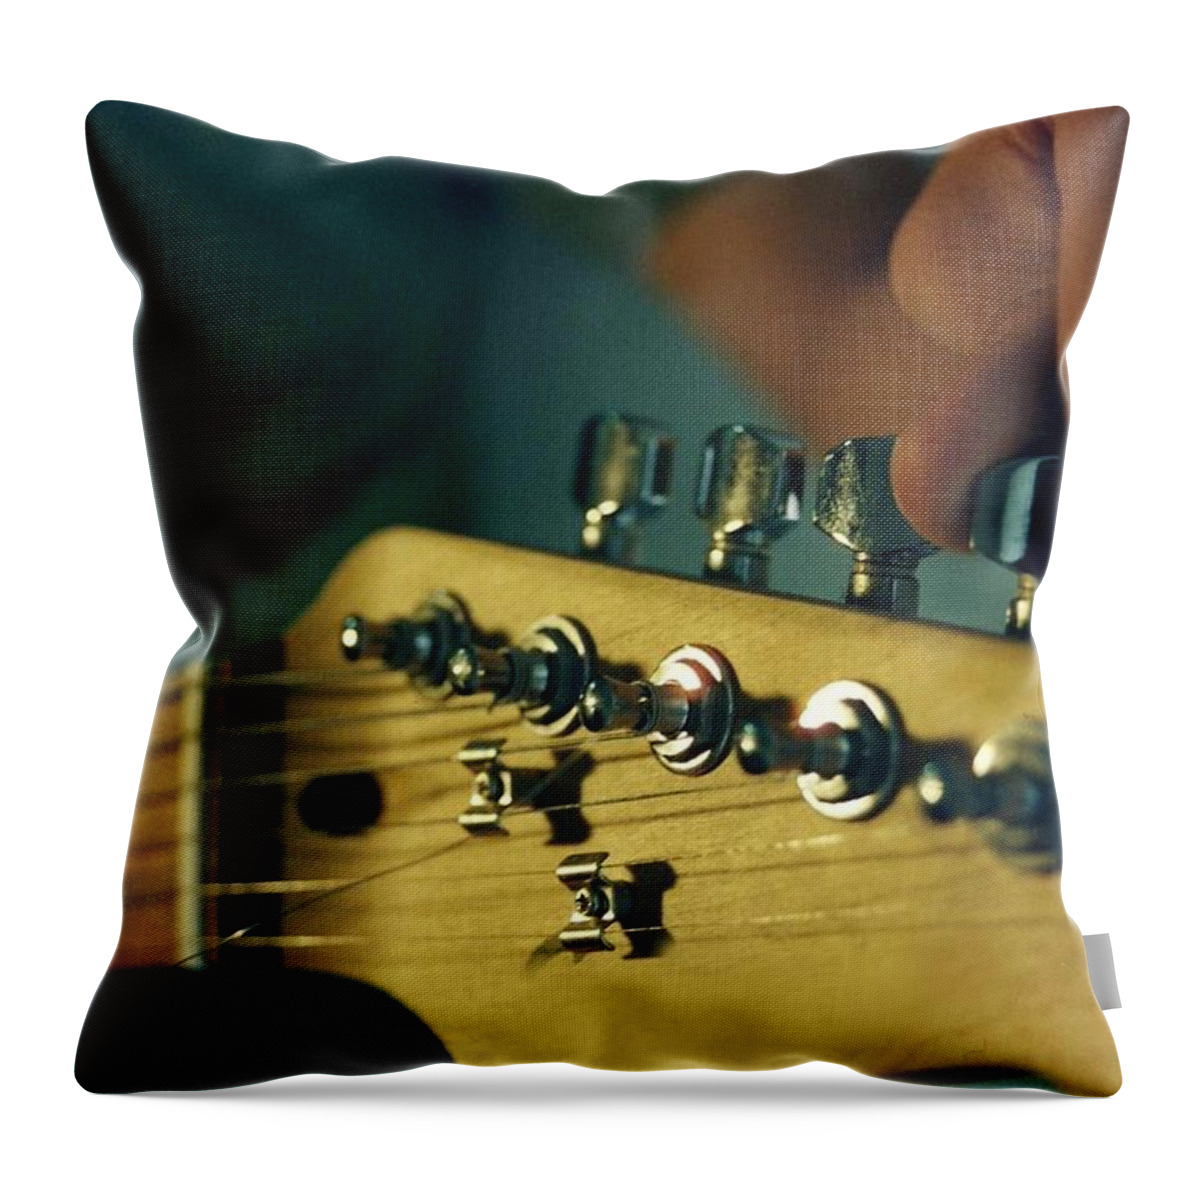 Rock Music Throw Pillow featuring the photograph Guitarra Guitar by Javier Canale